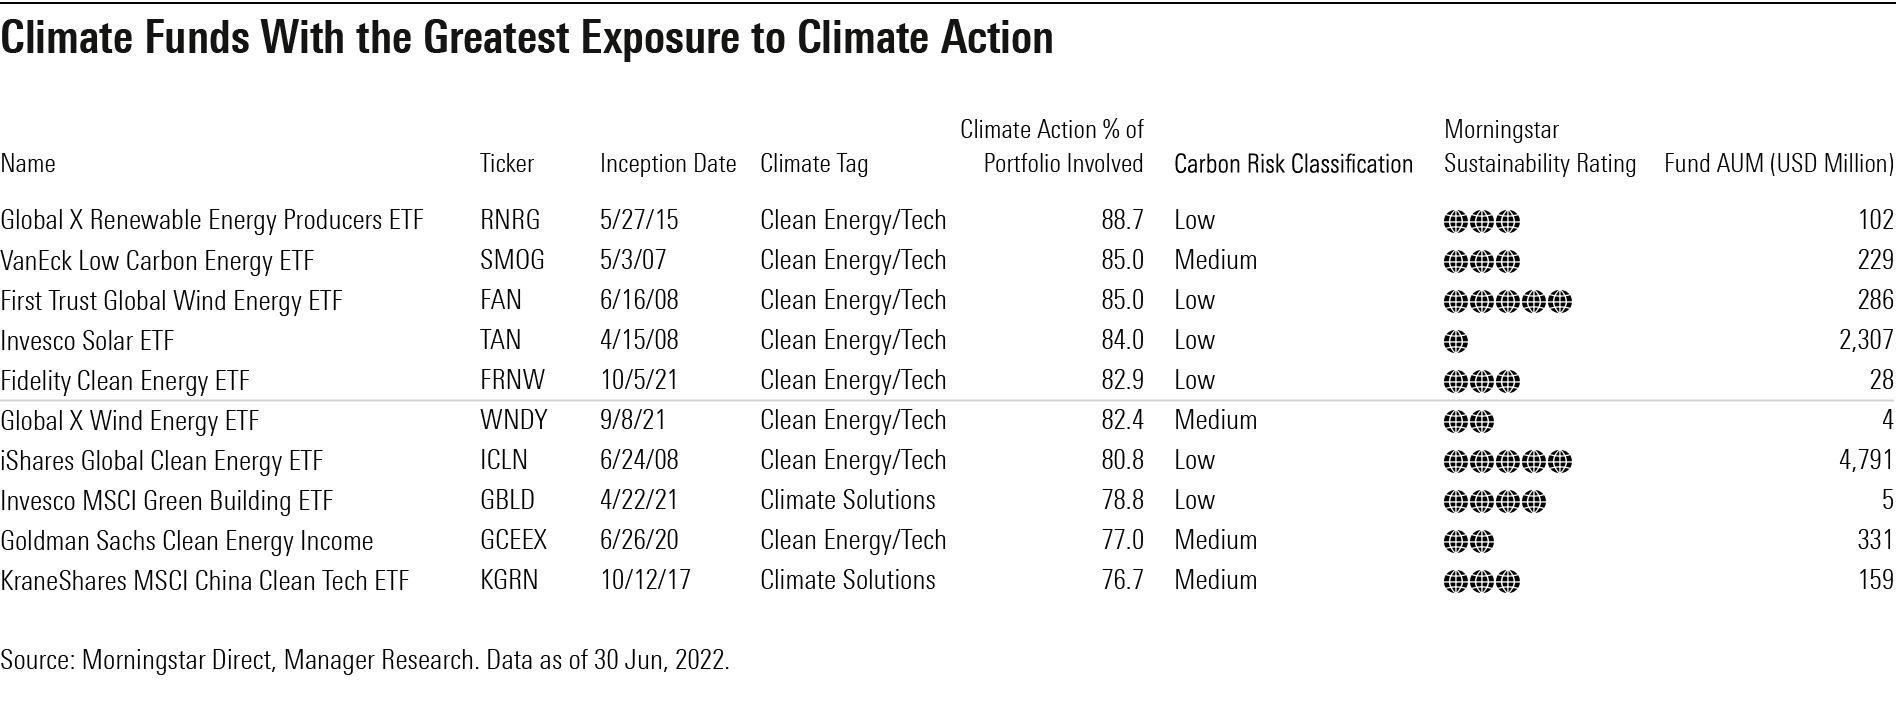 Table showing the top 10 climate funds in terms of exposure to climate action.